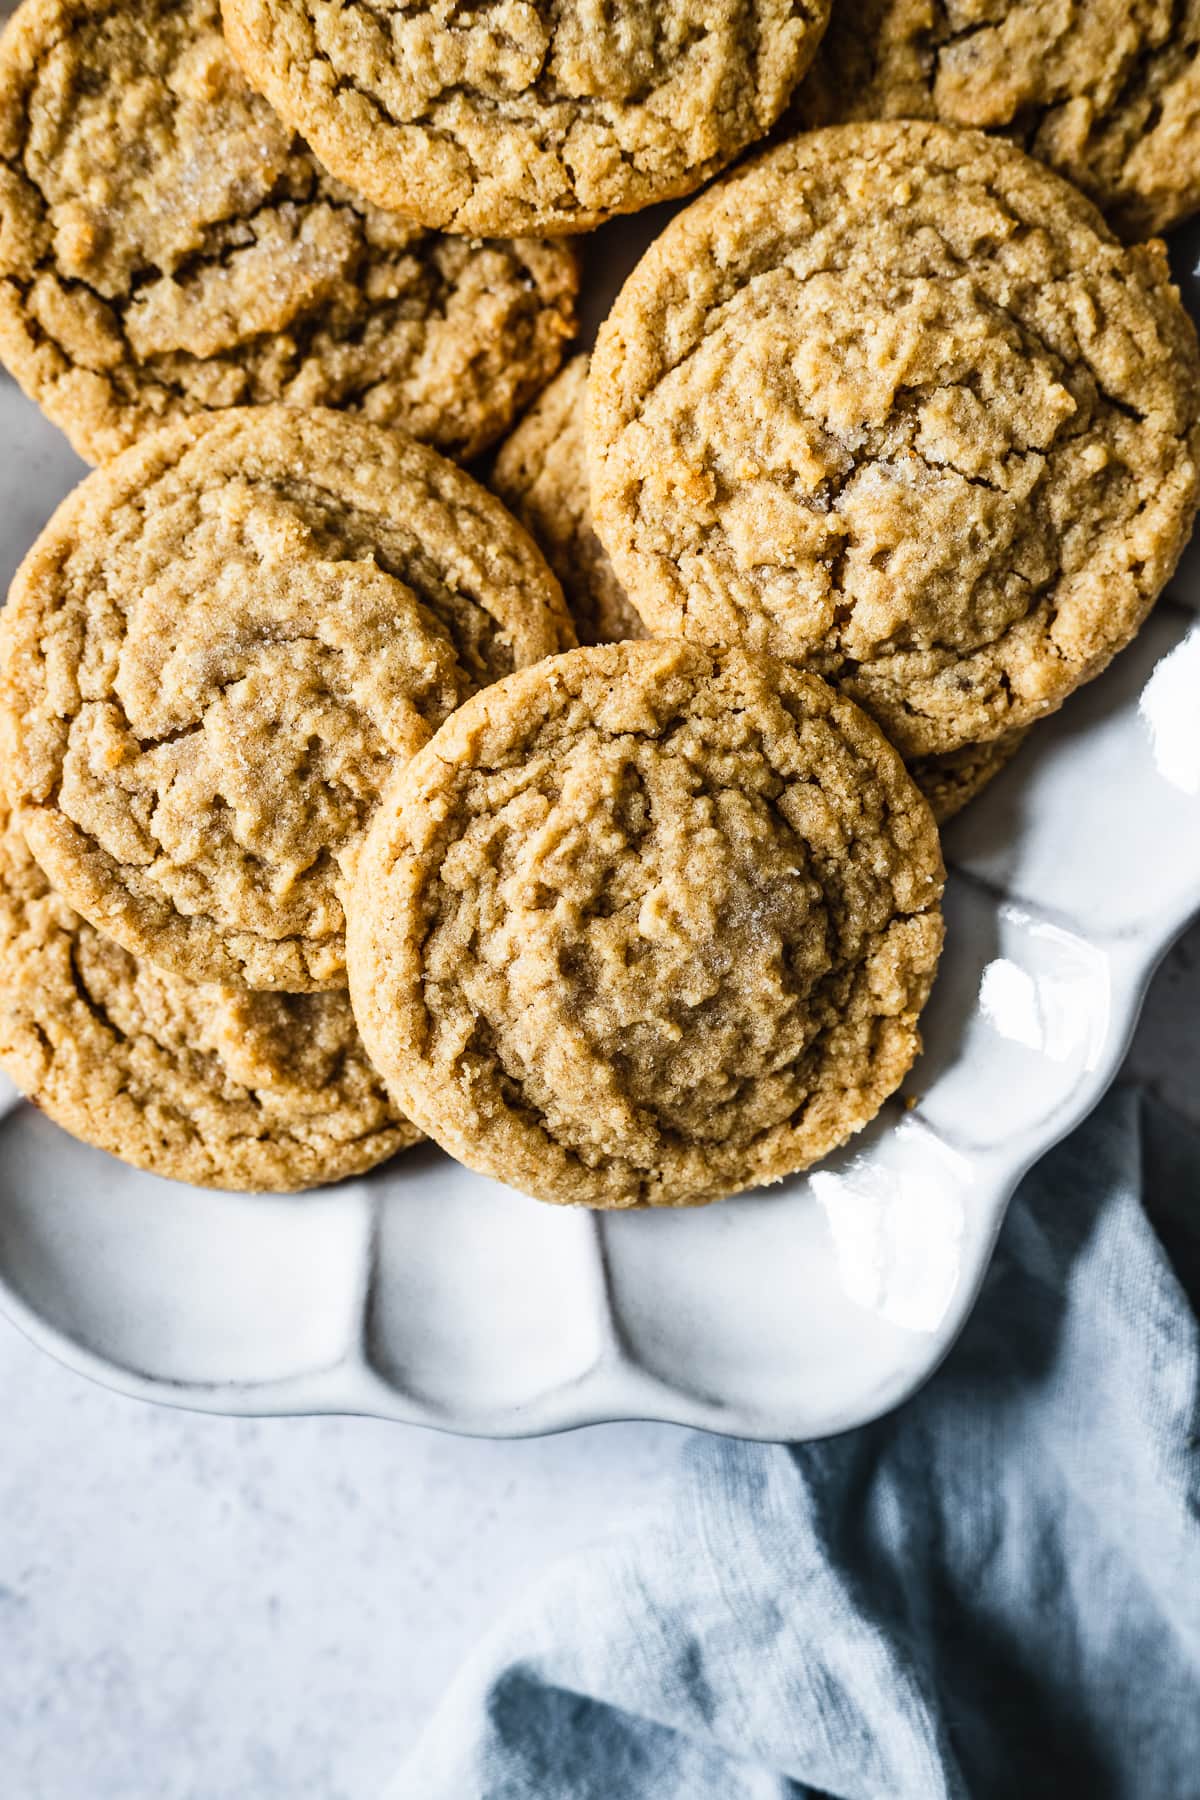 Peanut butter cookies on a fluted white ceramic serving plate. A light blue linen napkin peeks into the bottom right of the frame.